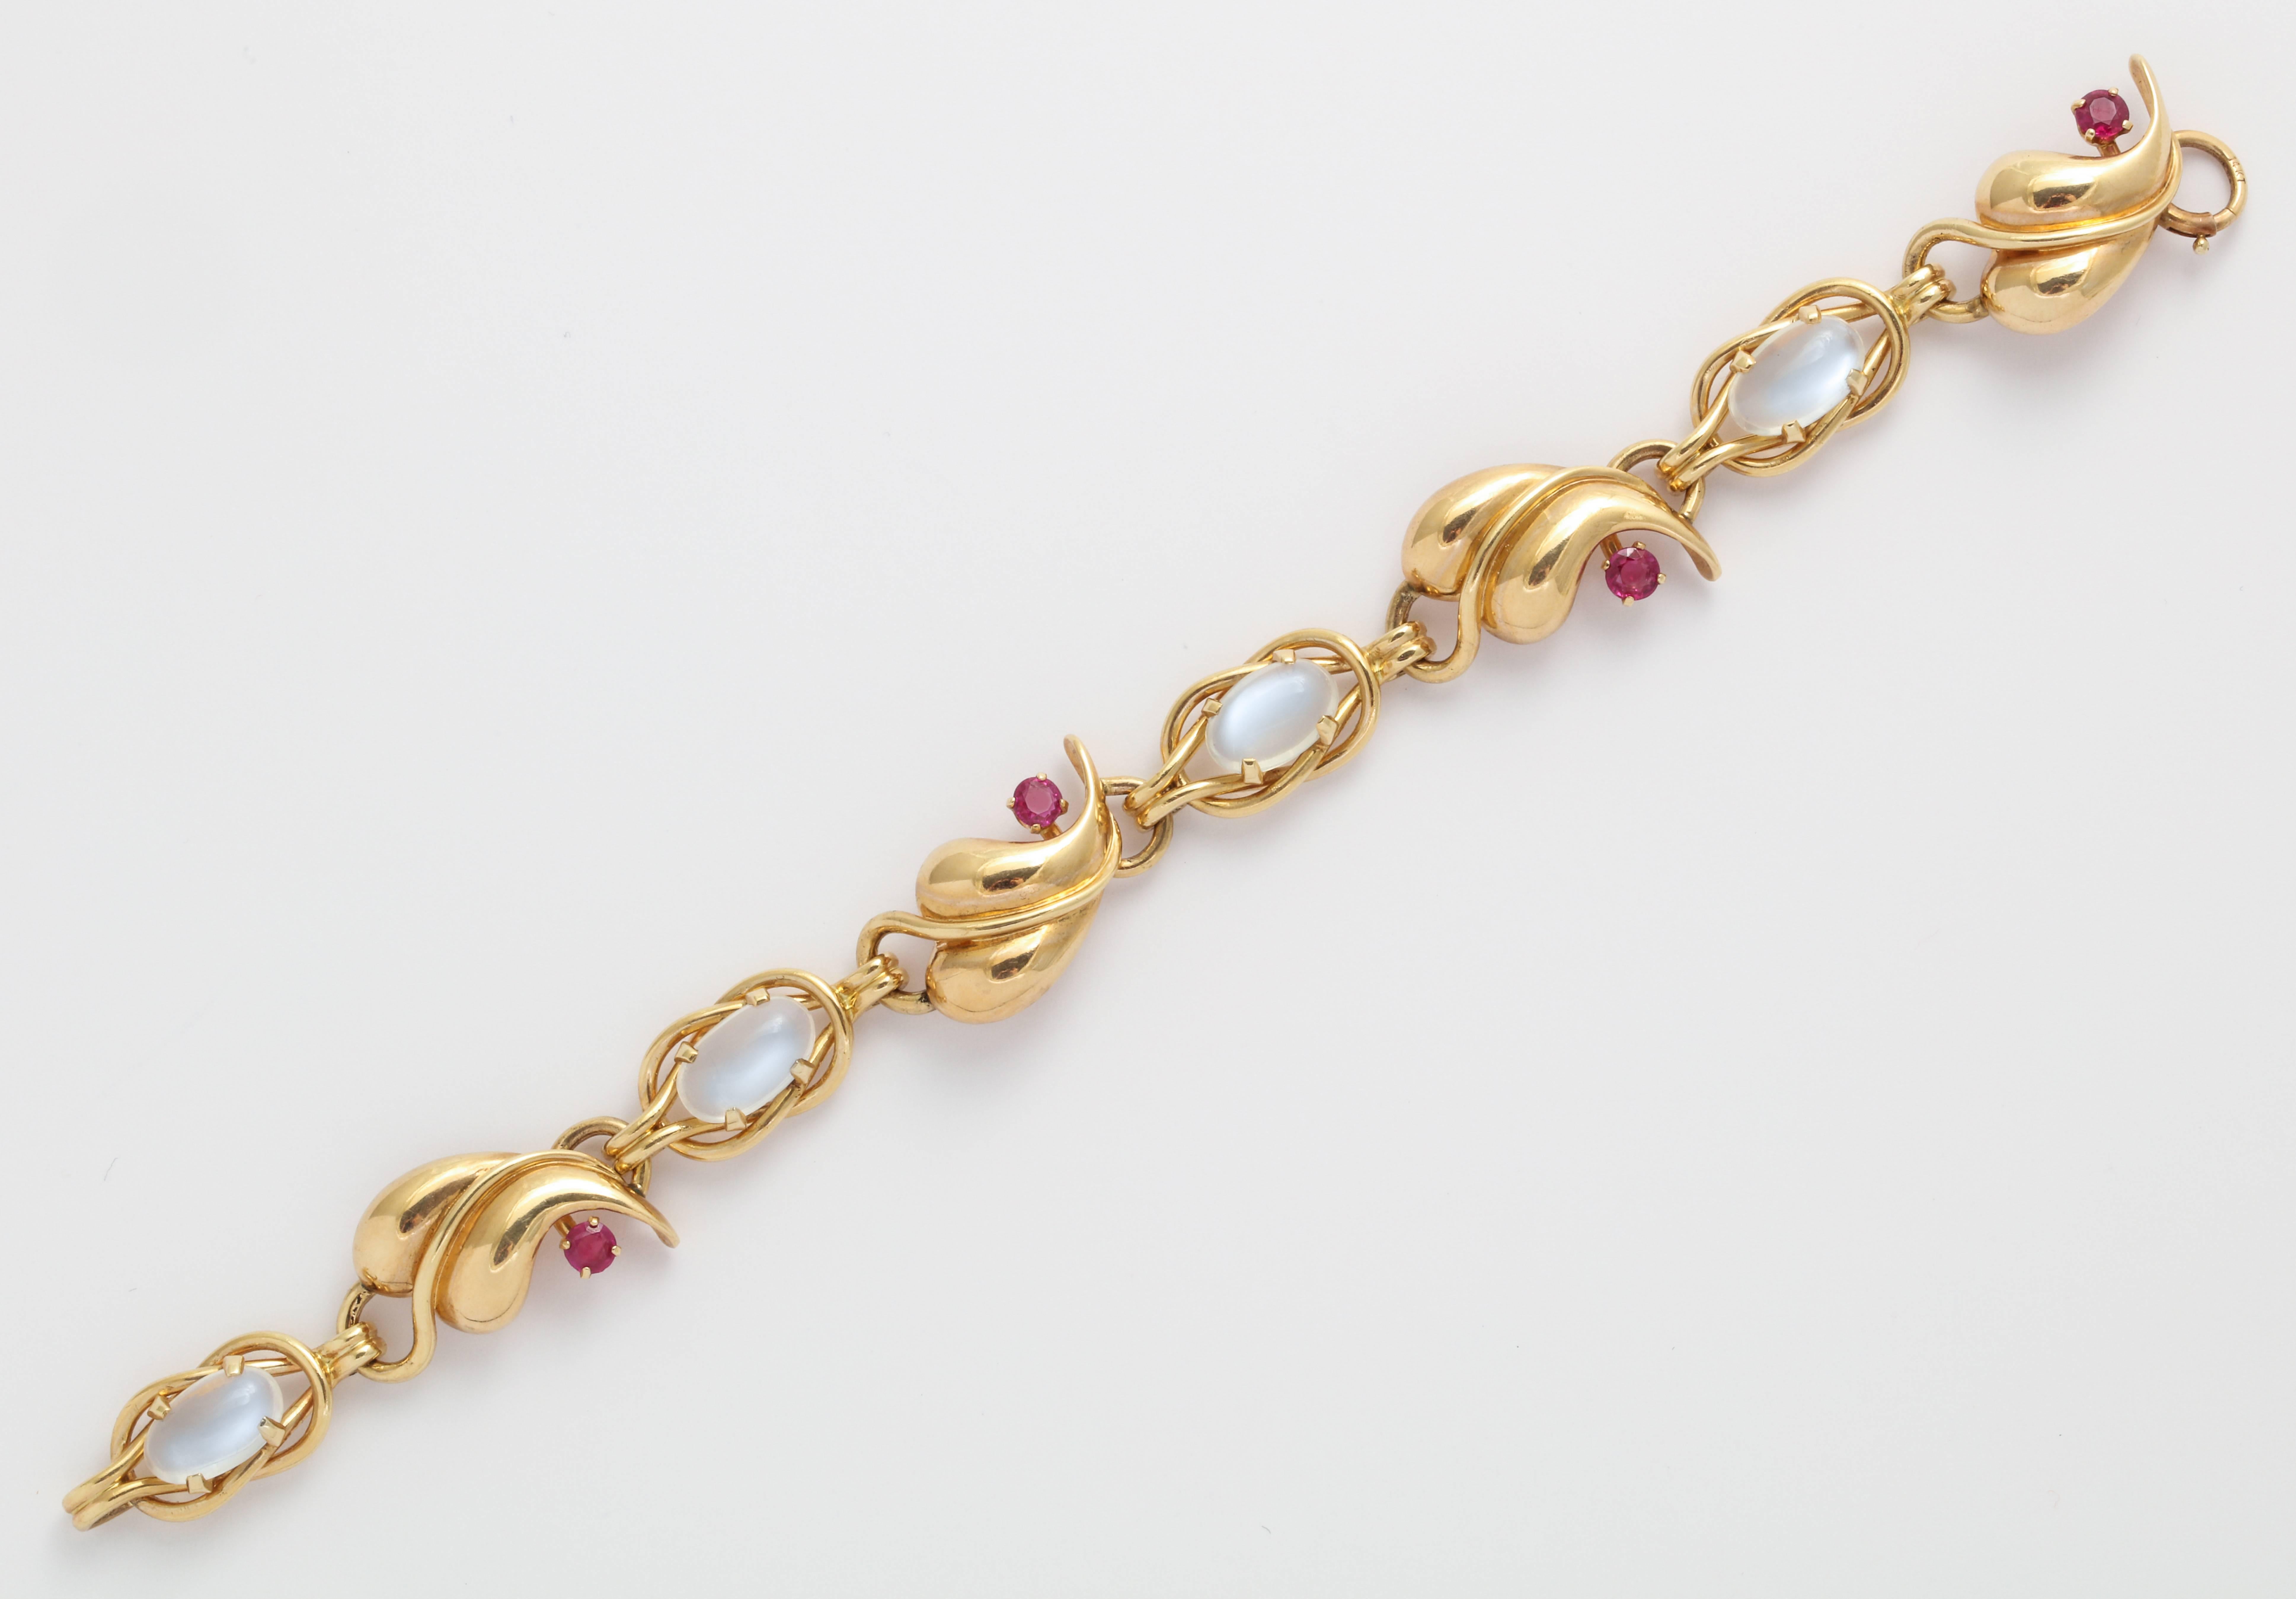 Cabochon Moonstone and Ruby Retro Gold Bracelet